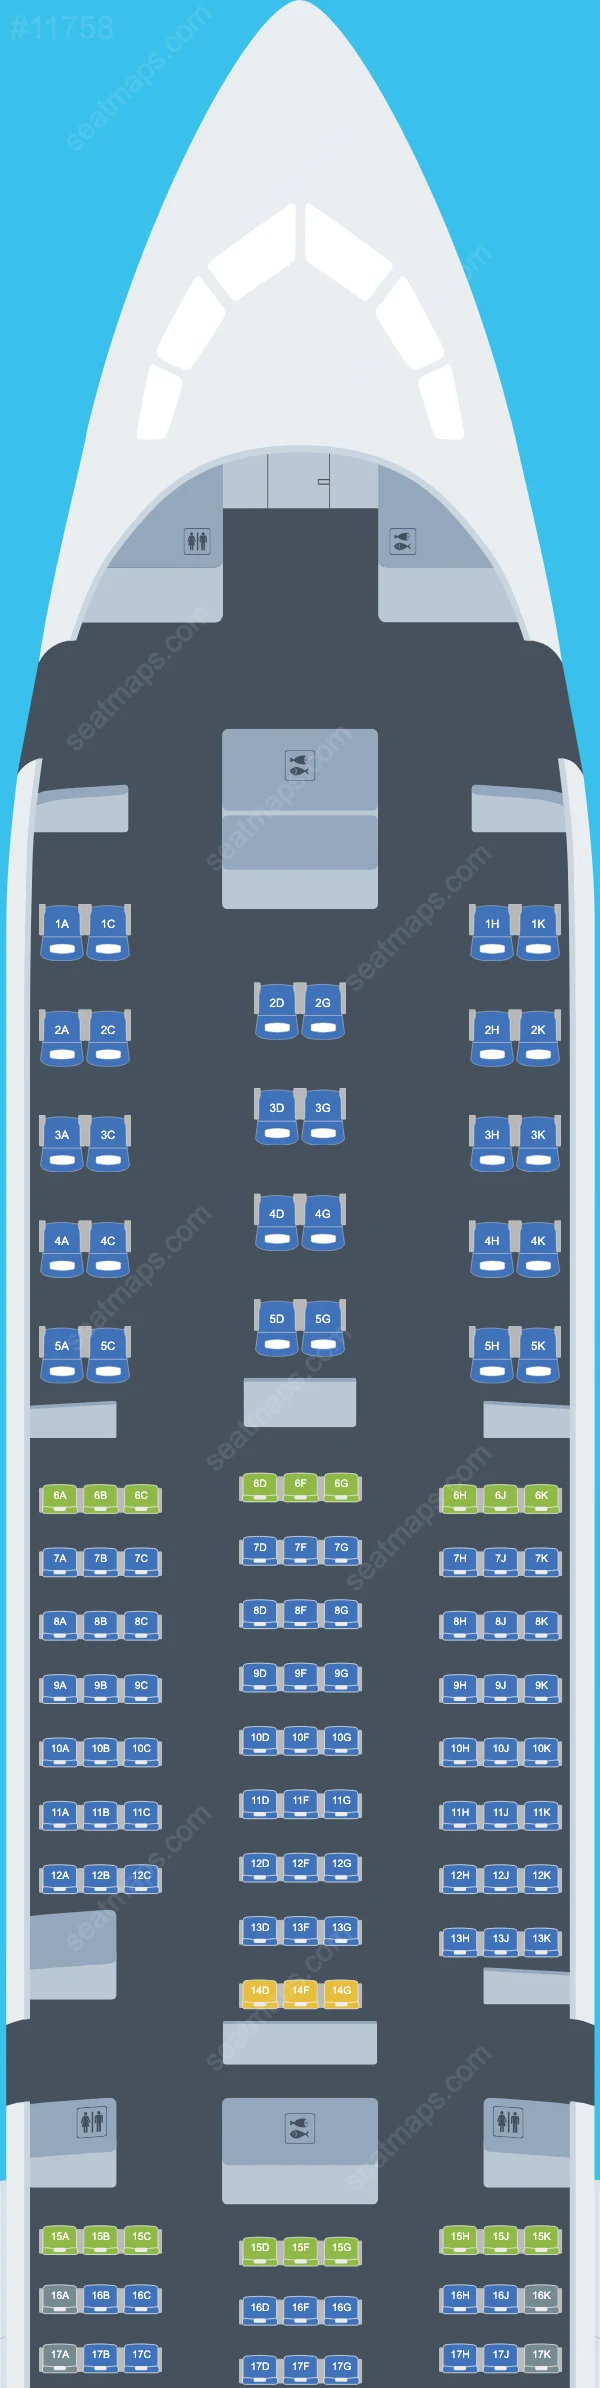 ANA (All Nippon Airways) Boeing 787-10 seatmap mobile preview